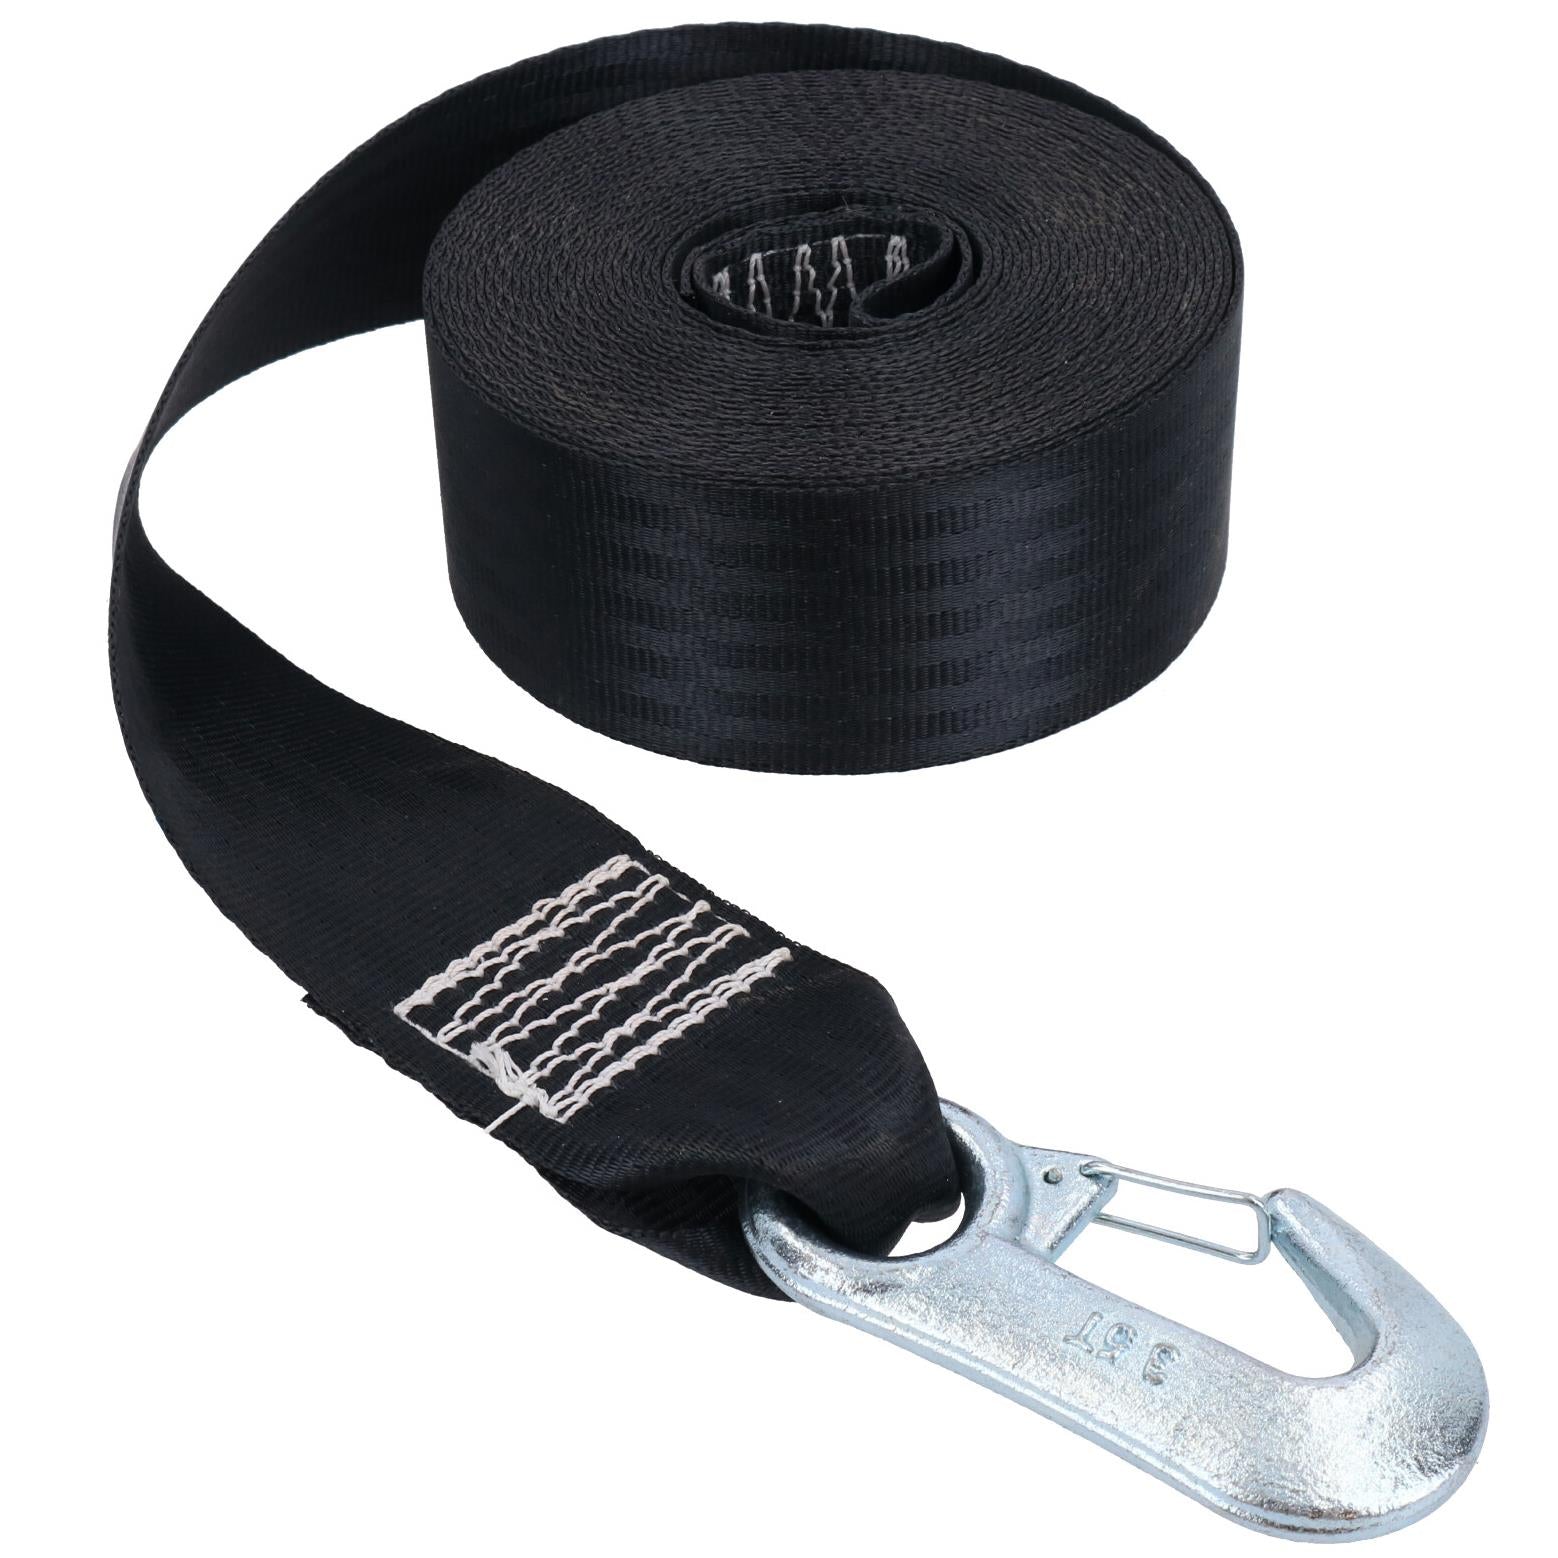 Trailer Winch Strap for Boat, Jetski and Car Trailers 7m Webbing TR106